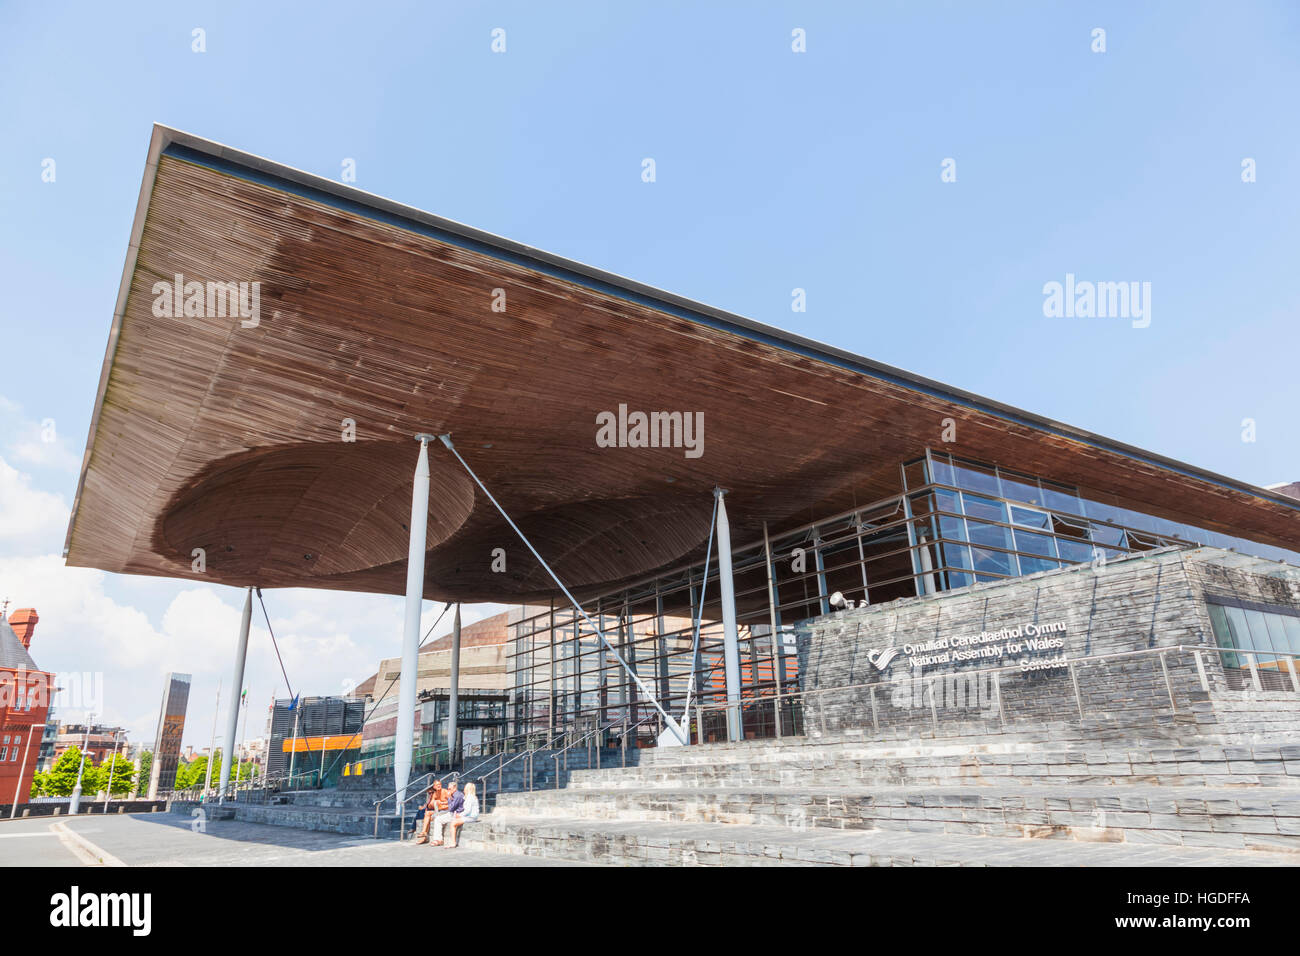 Il Galles, Cardiff, Cardiff Bay, National Assembly for Wales edificio Foto Stock